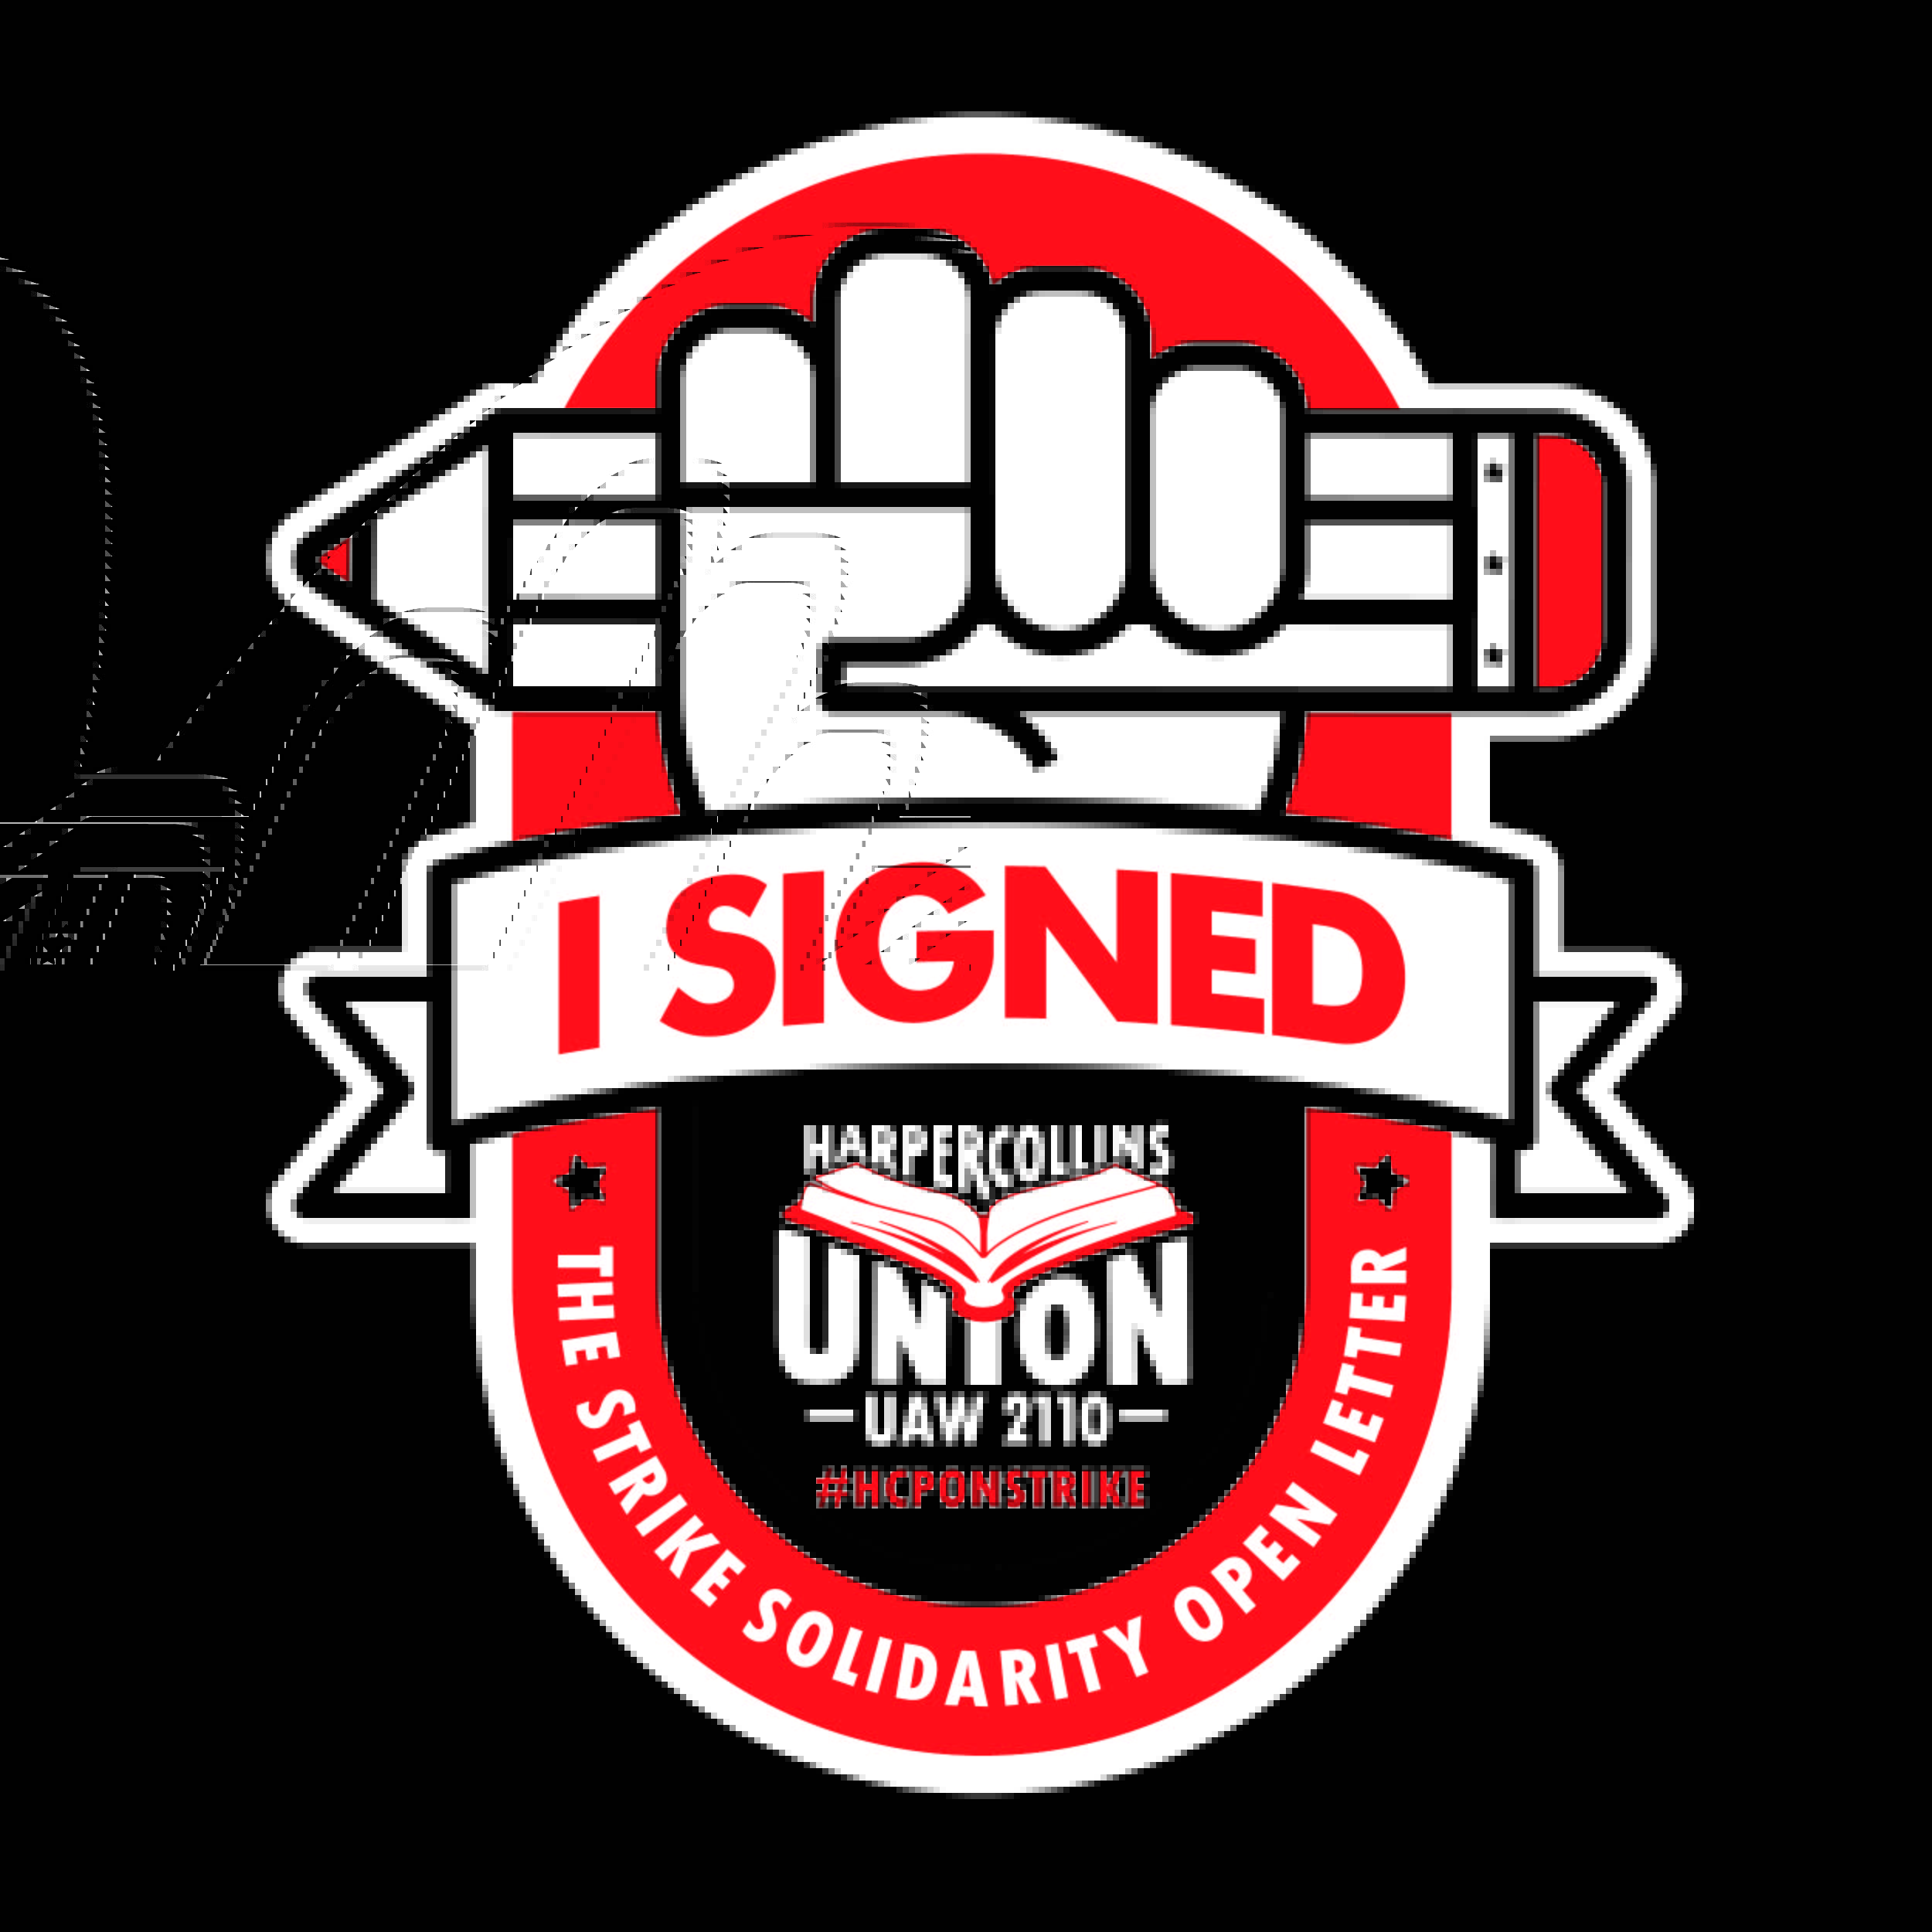 “I signed” graphics provided by HarperCollins Union